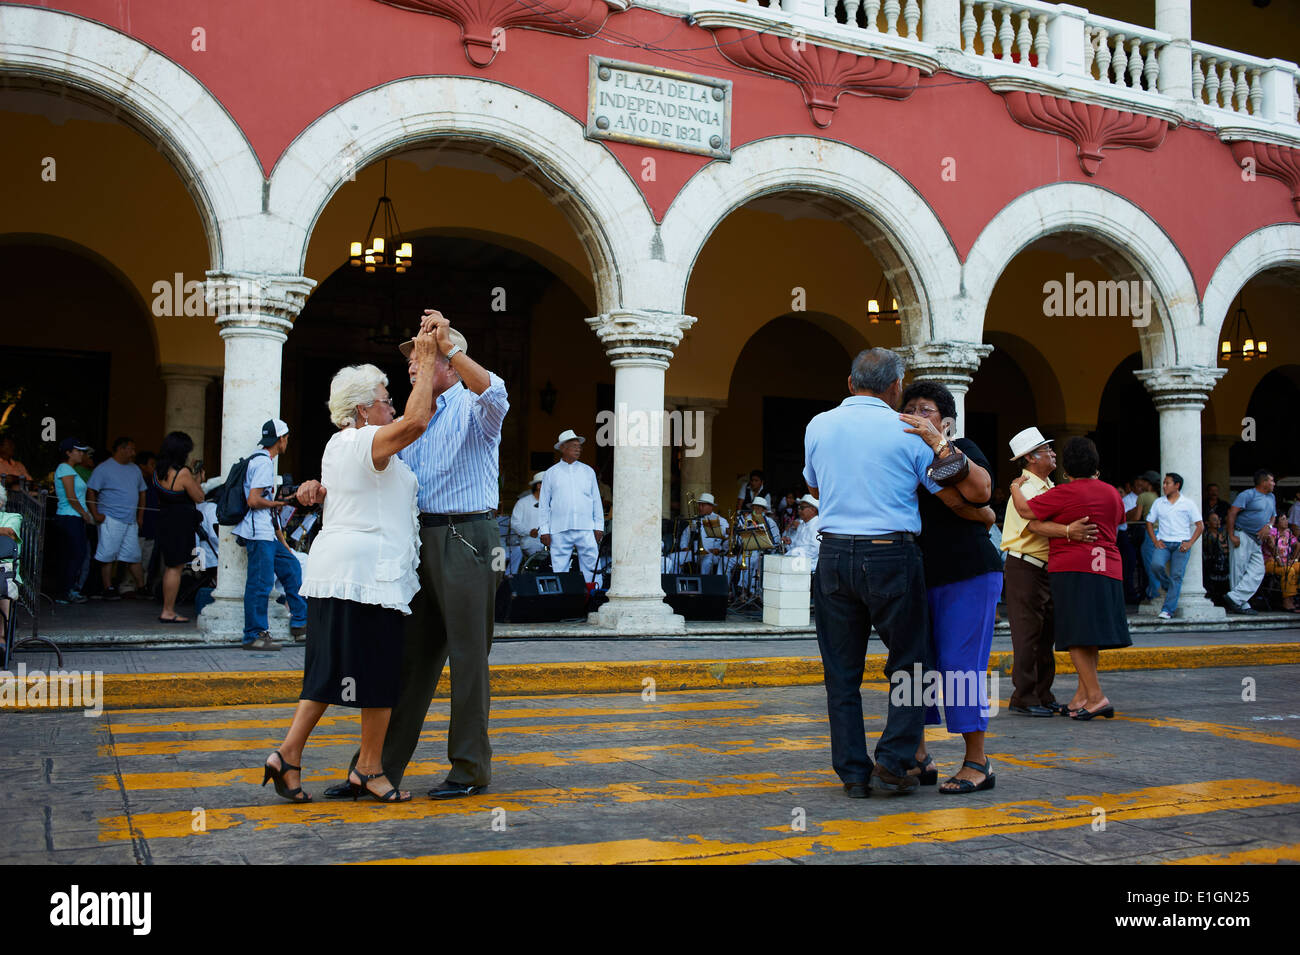 Mexico, Yucatan state, Merida, the capital of Yucatan, square of independence, municipal palace, Mexican dancers and musicians Stock Photo